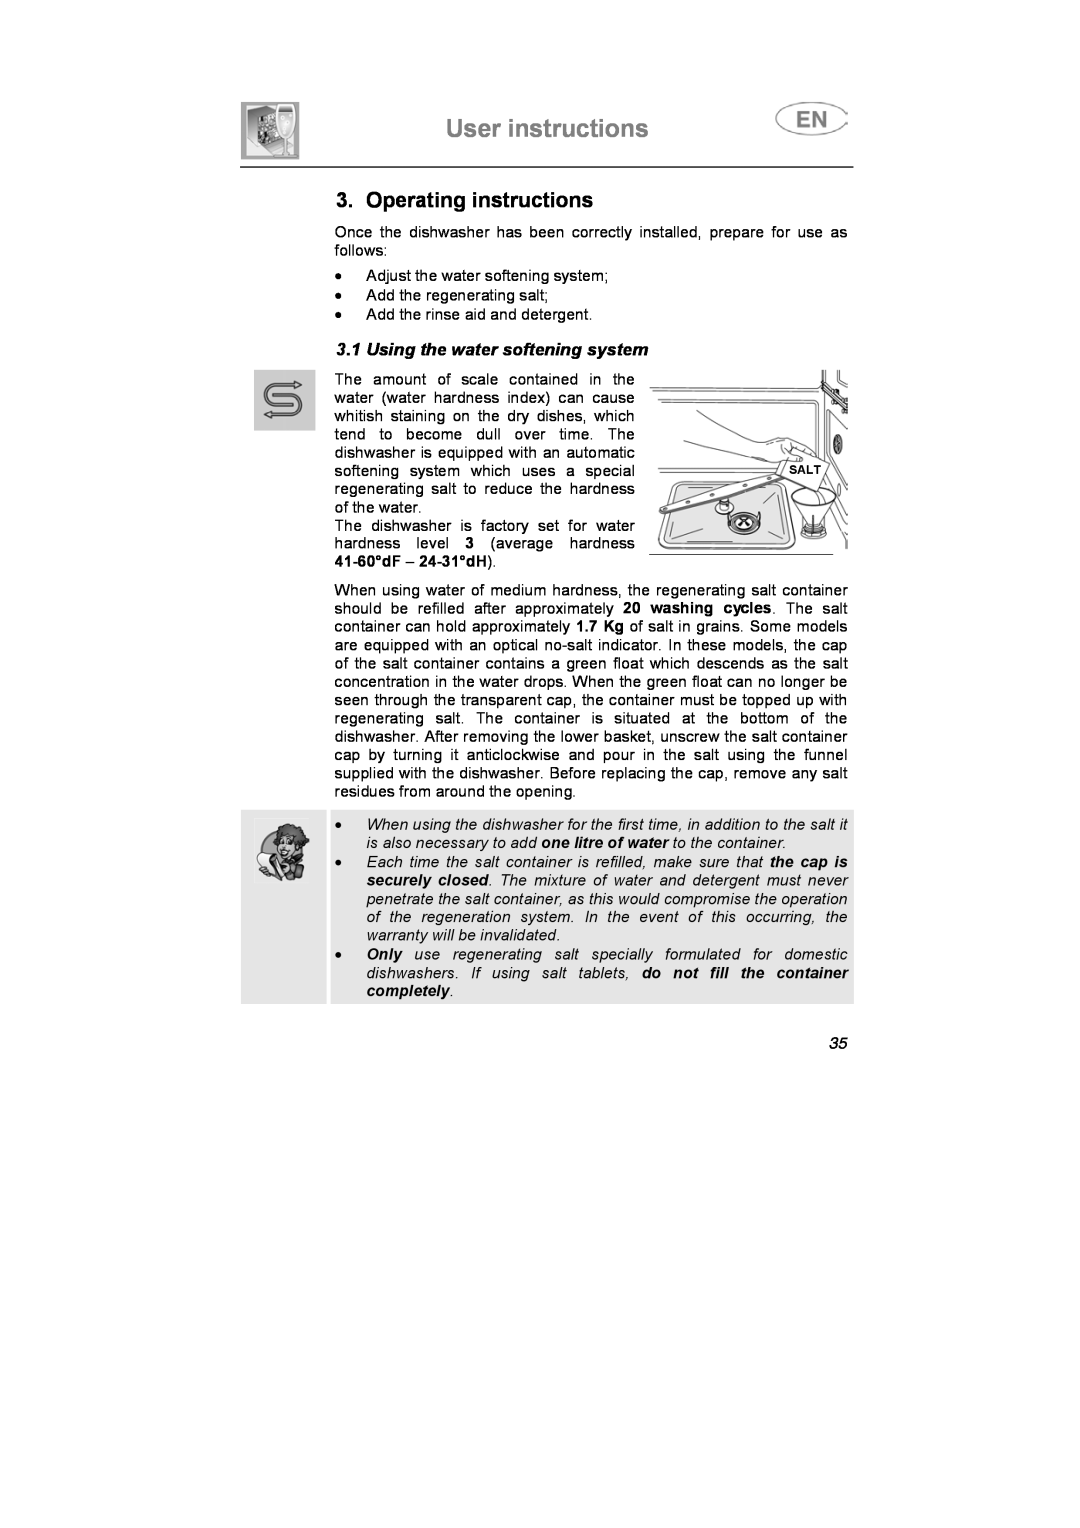 CDA VW80 manual User instructions, Operating instructions, Using the water softening system 